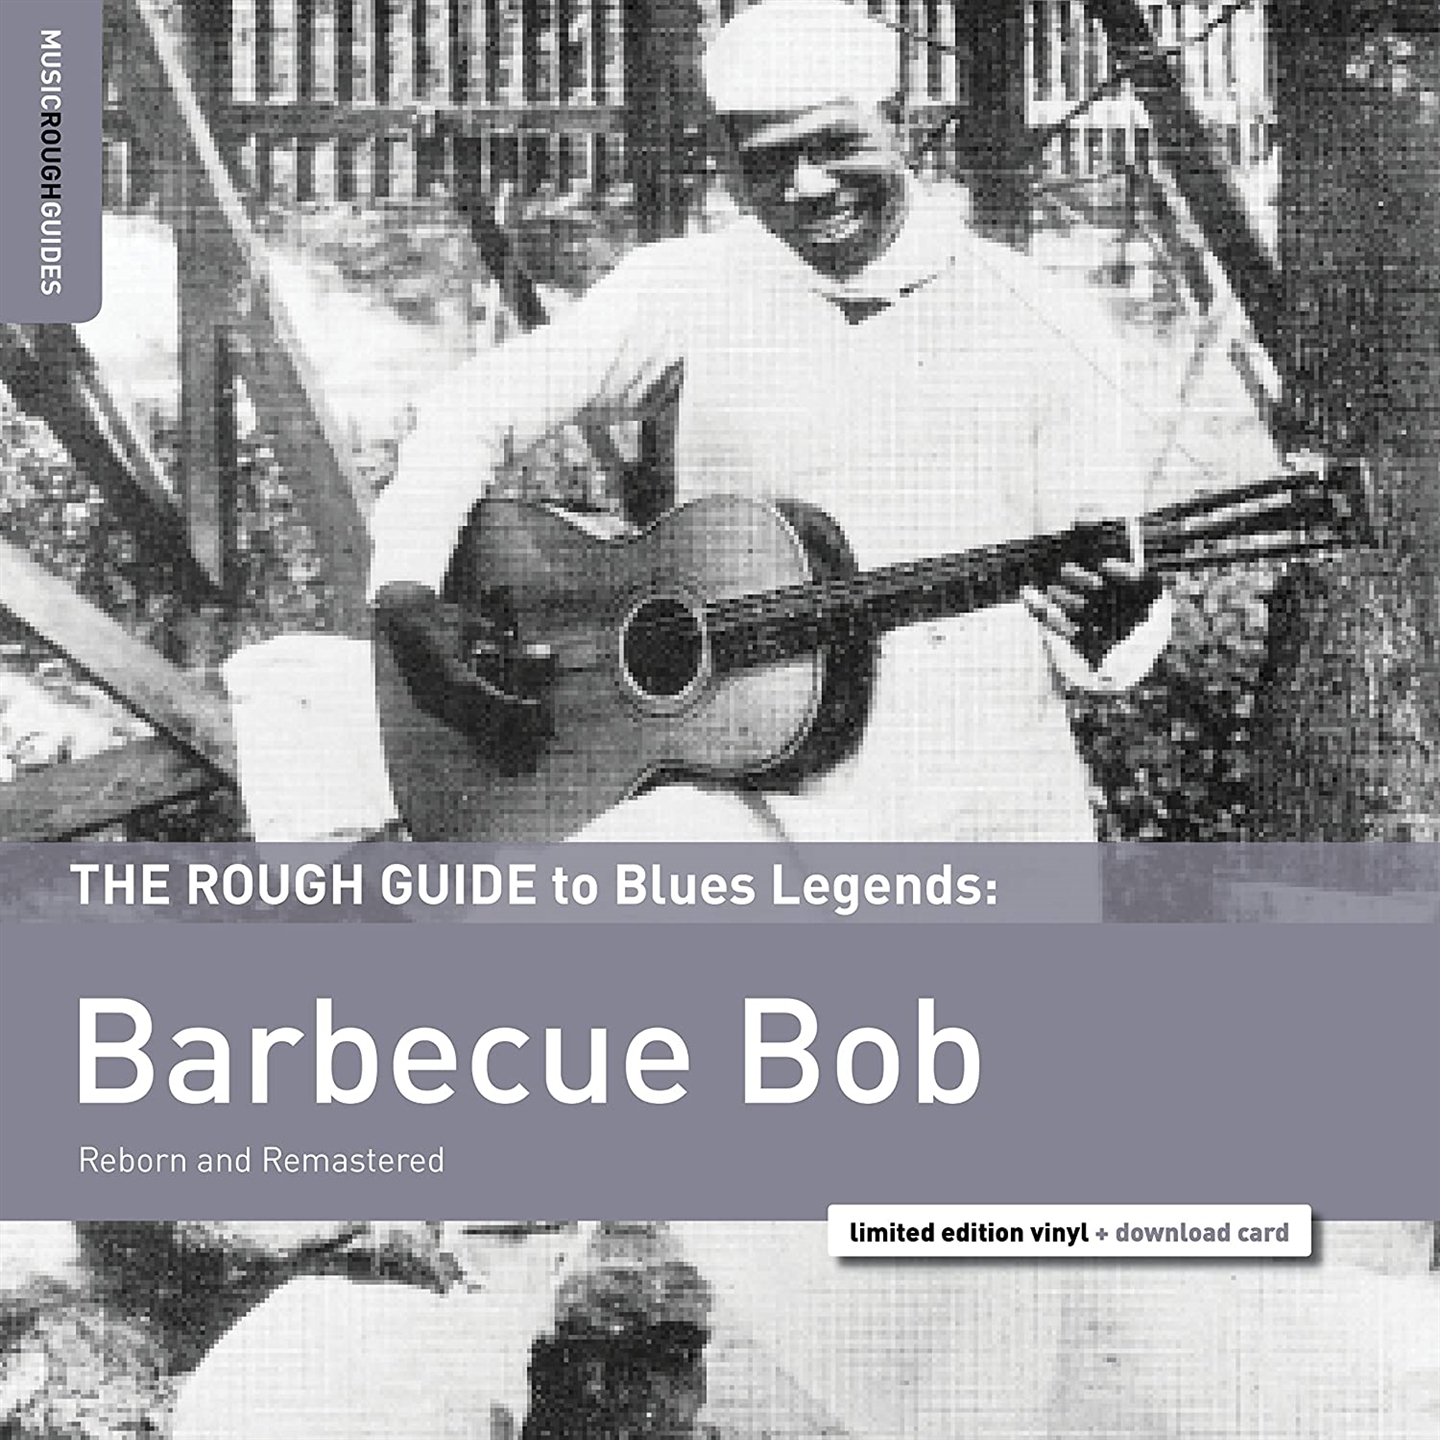 THE ROUGH GUIDE TO BLUES LEGENDS: BARBECUE BOB [LP]